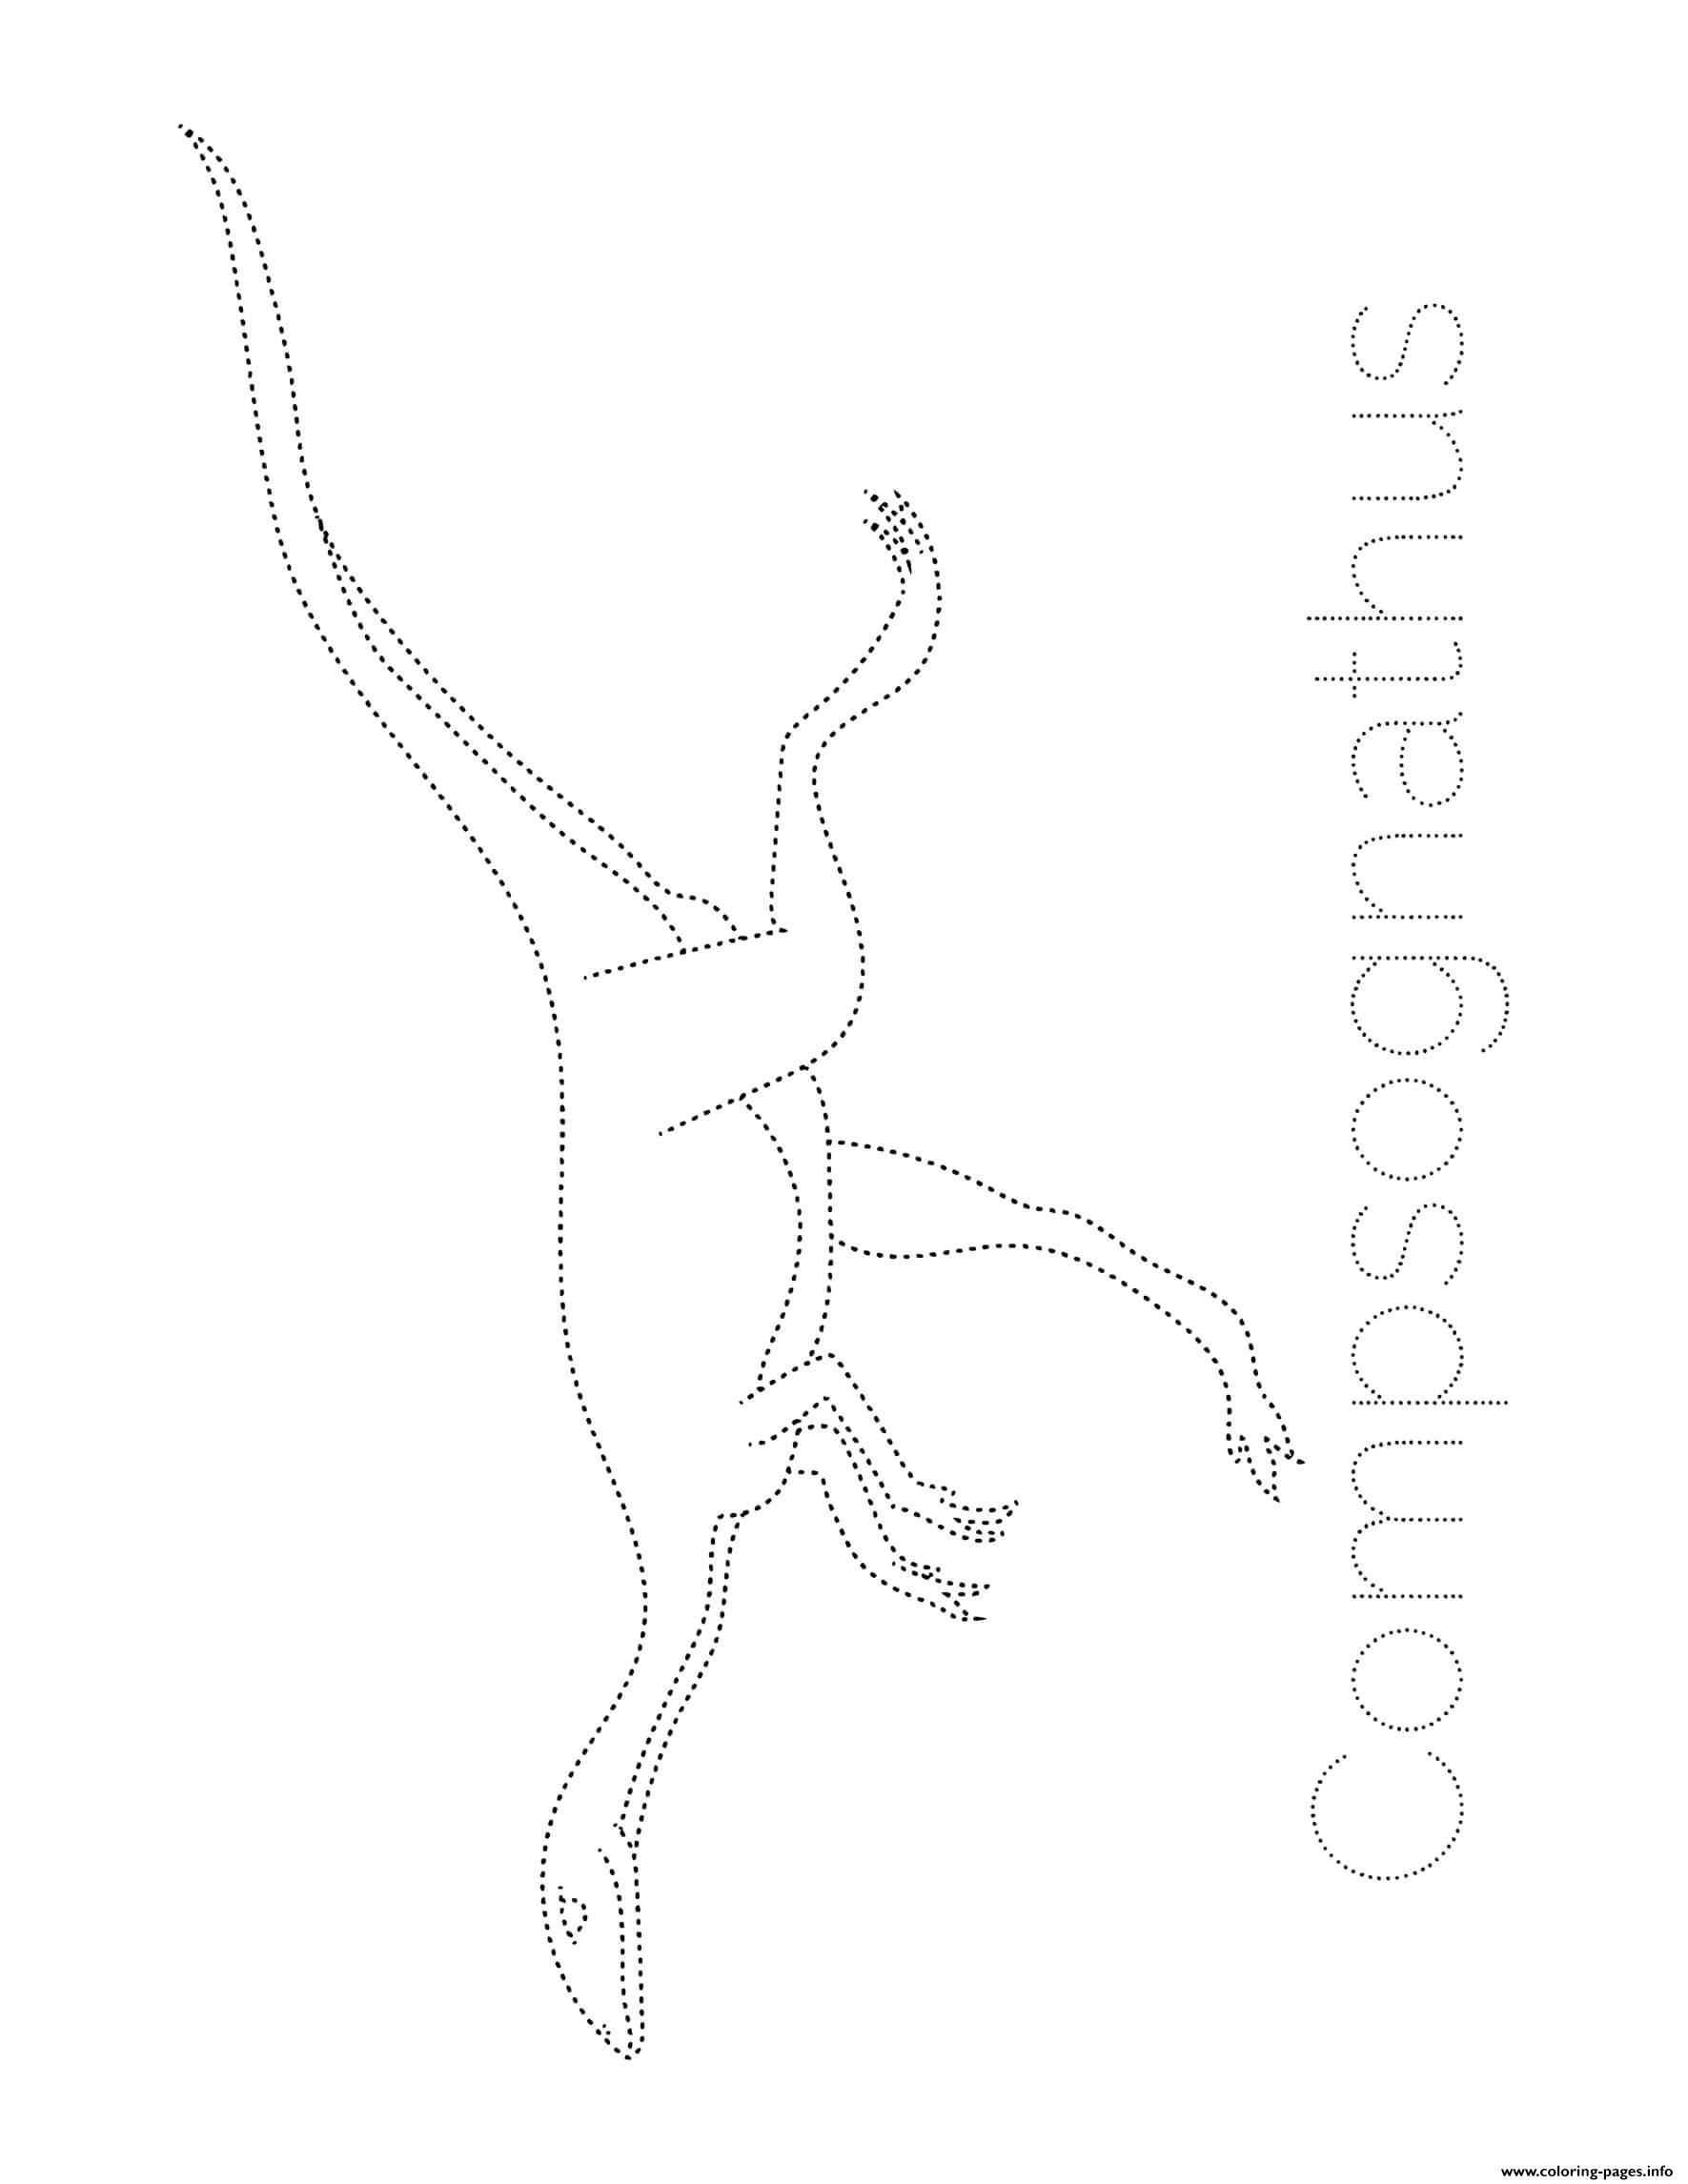 Dinosaur Compsognathus Tracing Picture coloring